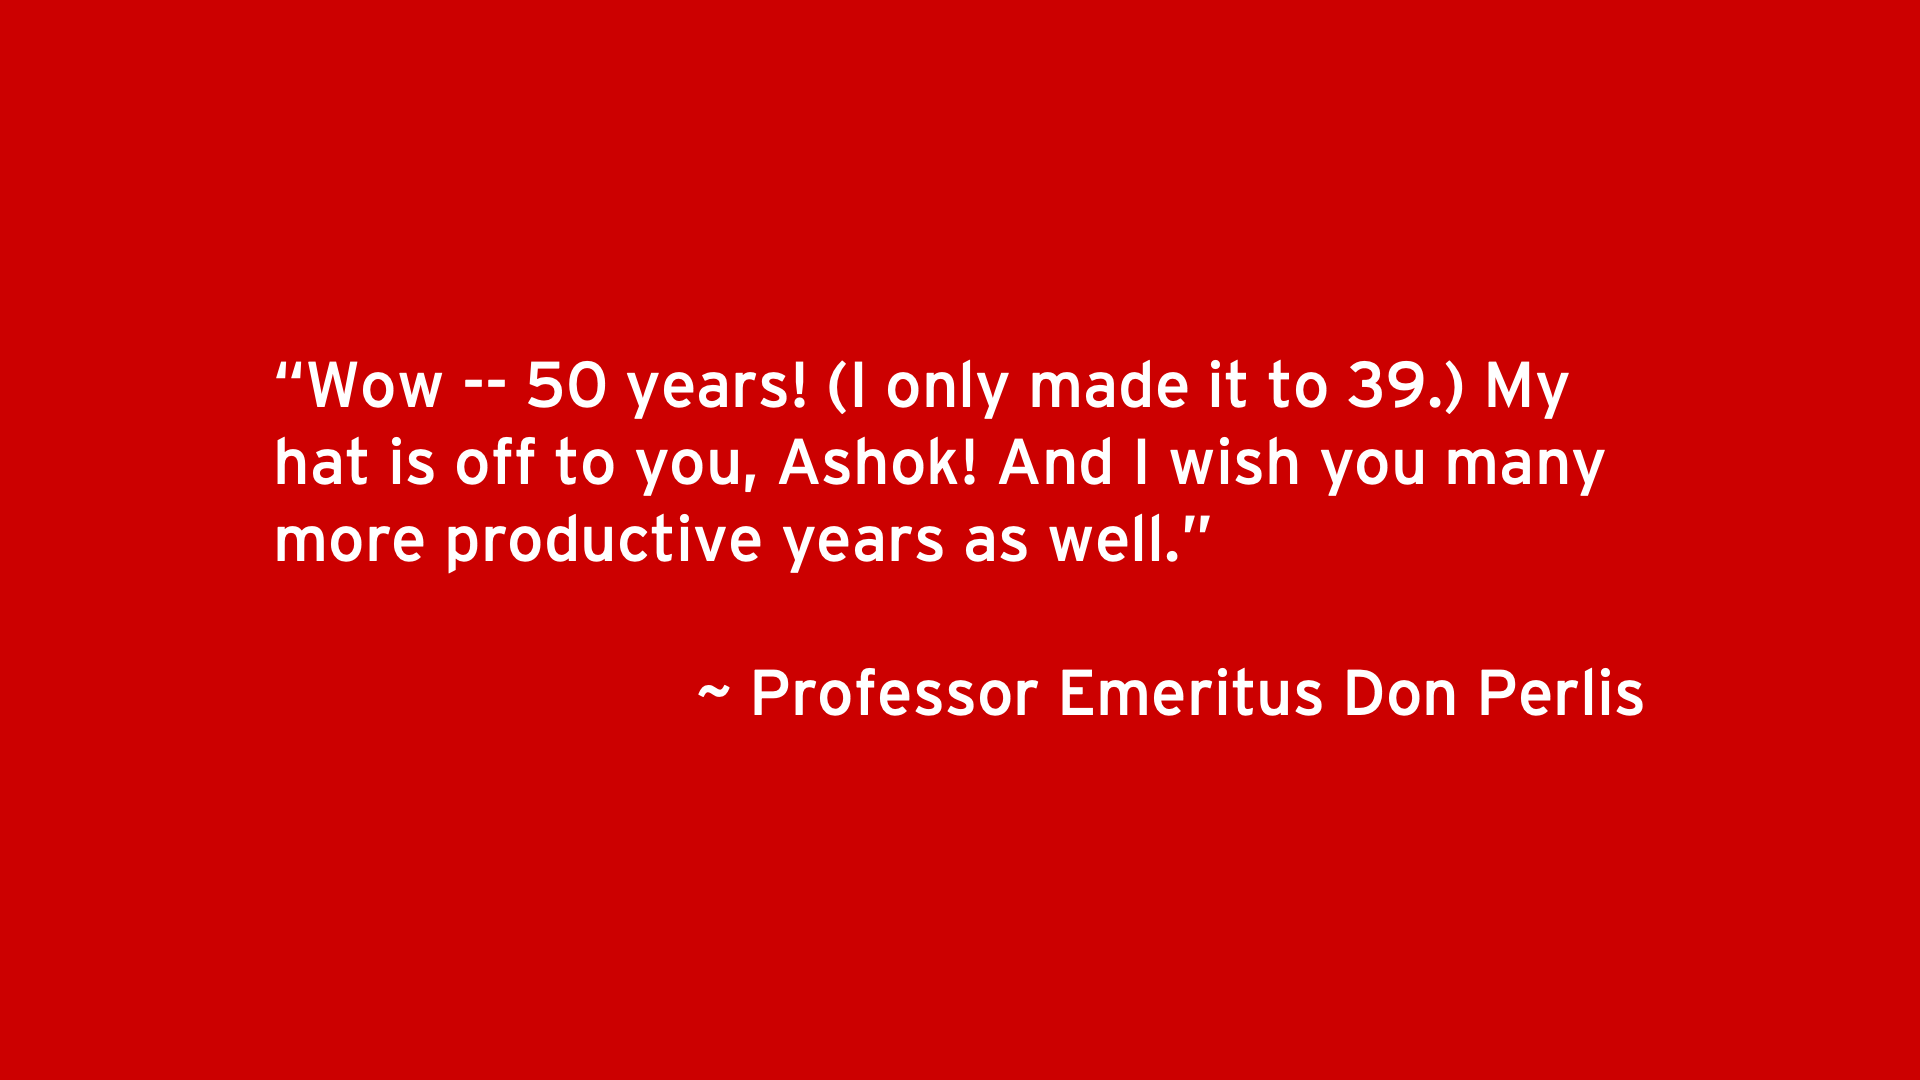 Wow -- 50 years! (I only made it to 39.) My hat is off to you, Ashok! And I wish you many more productive years as well. - Professor Emeritus Don Perlis